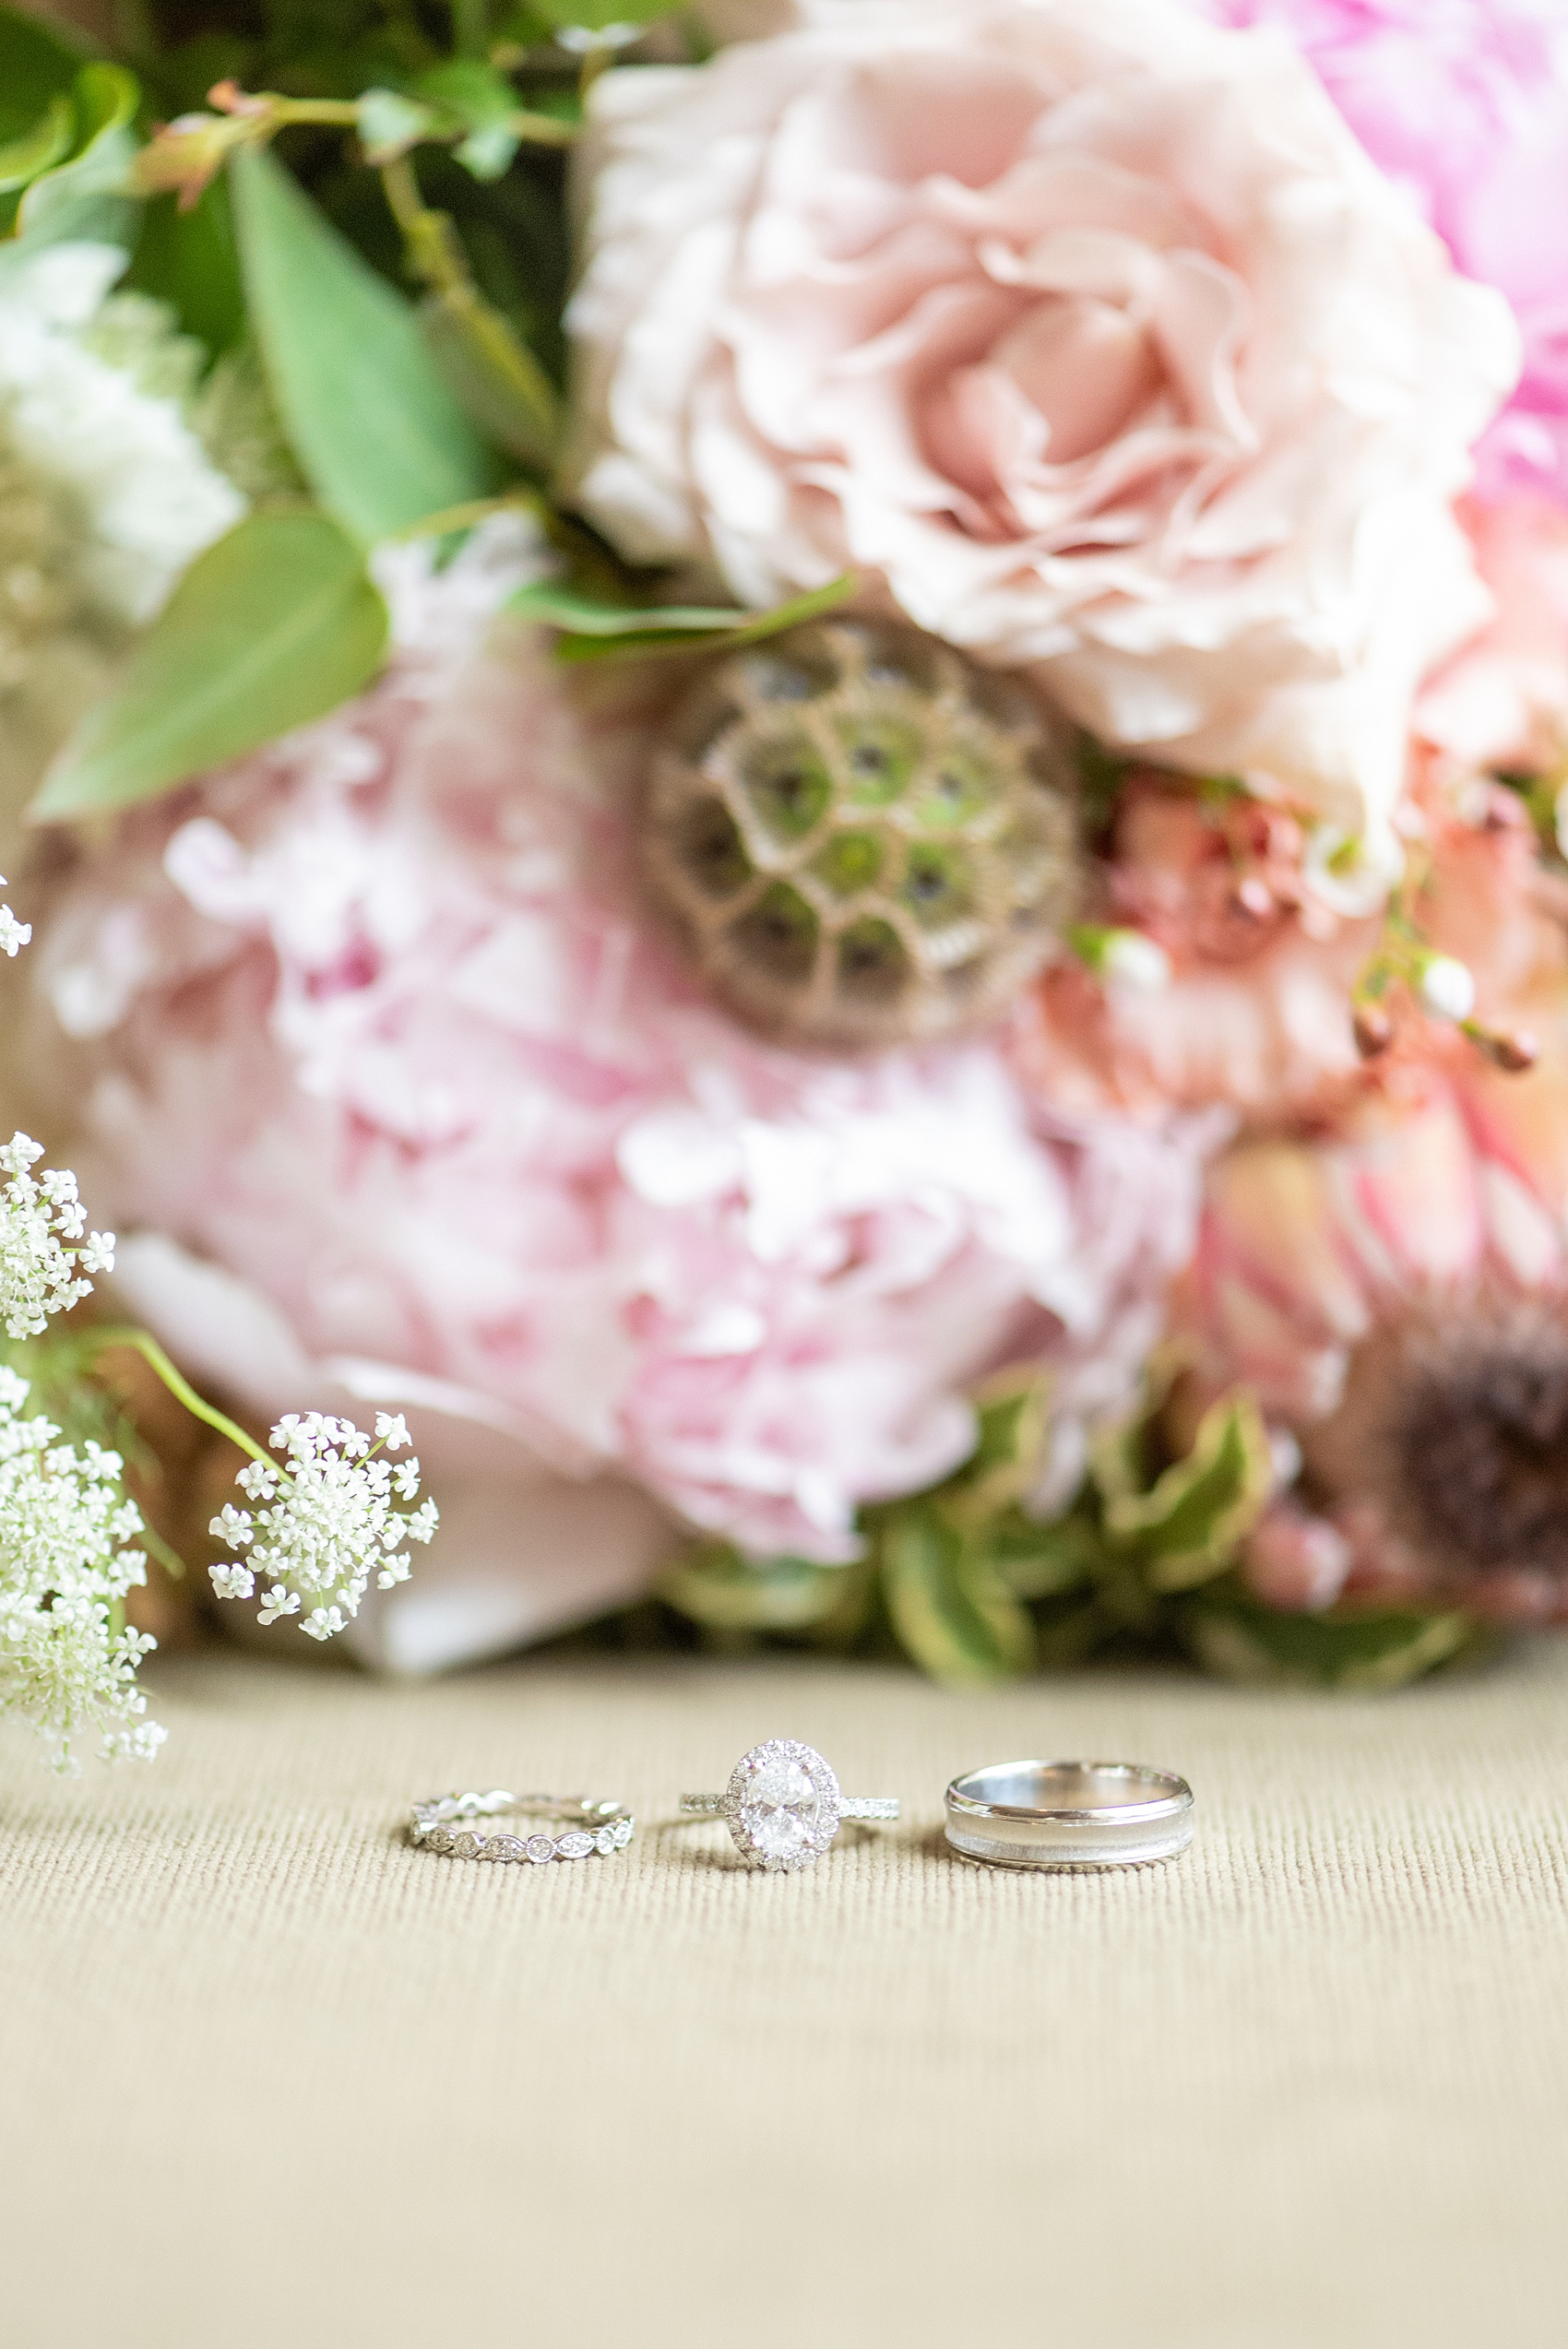 A summer wedding at Olde Mill Inn, NJ. Photos by Mikkel Paige Photography for an event with light pink and blue details. This New Jersey venue is a great option for something not too far from NYC. The bride’s engagement ring was an oval diamond with a halo. Click through for their complete wedding recap! #OldeMillInn #NJwedding #NJweddingphotographer #mikkelpaige #NewJerseyWeddingVenue #NewJerseyWedding #CrossEstateGardens #weddingdetails #rings #weddingrings #ovalengagementring #diamondring